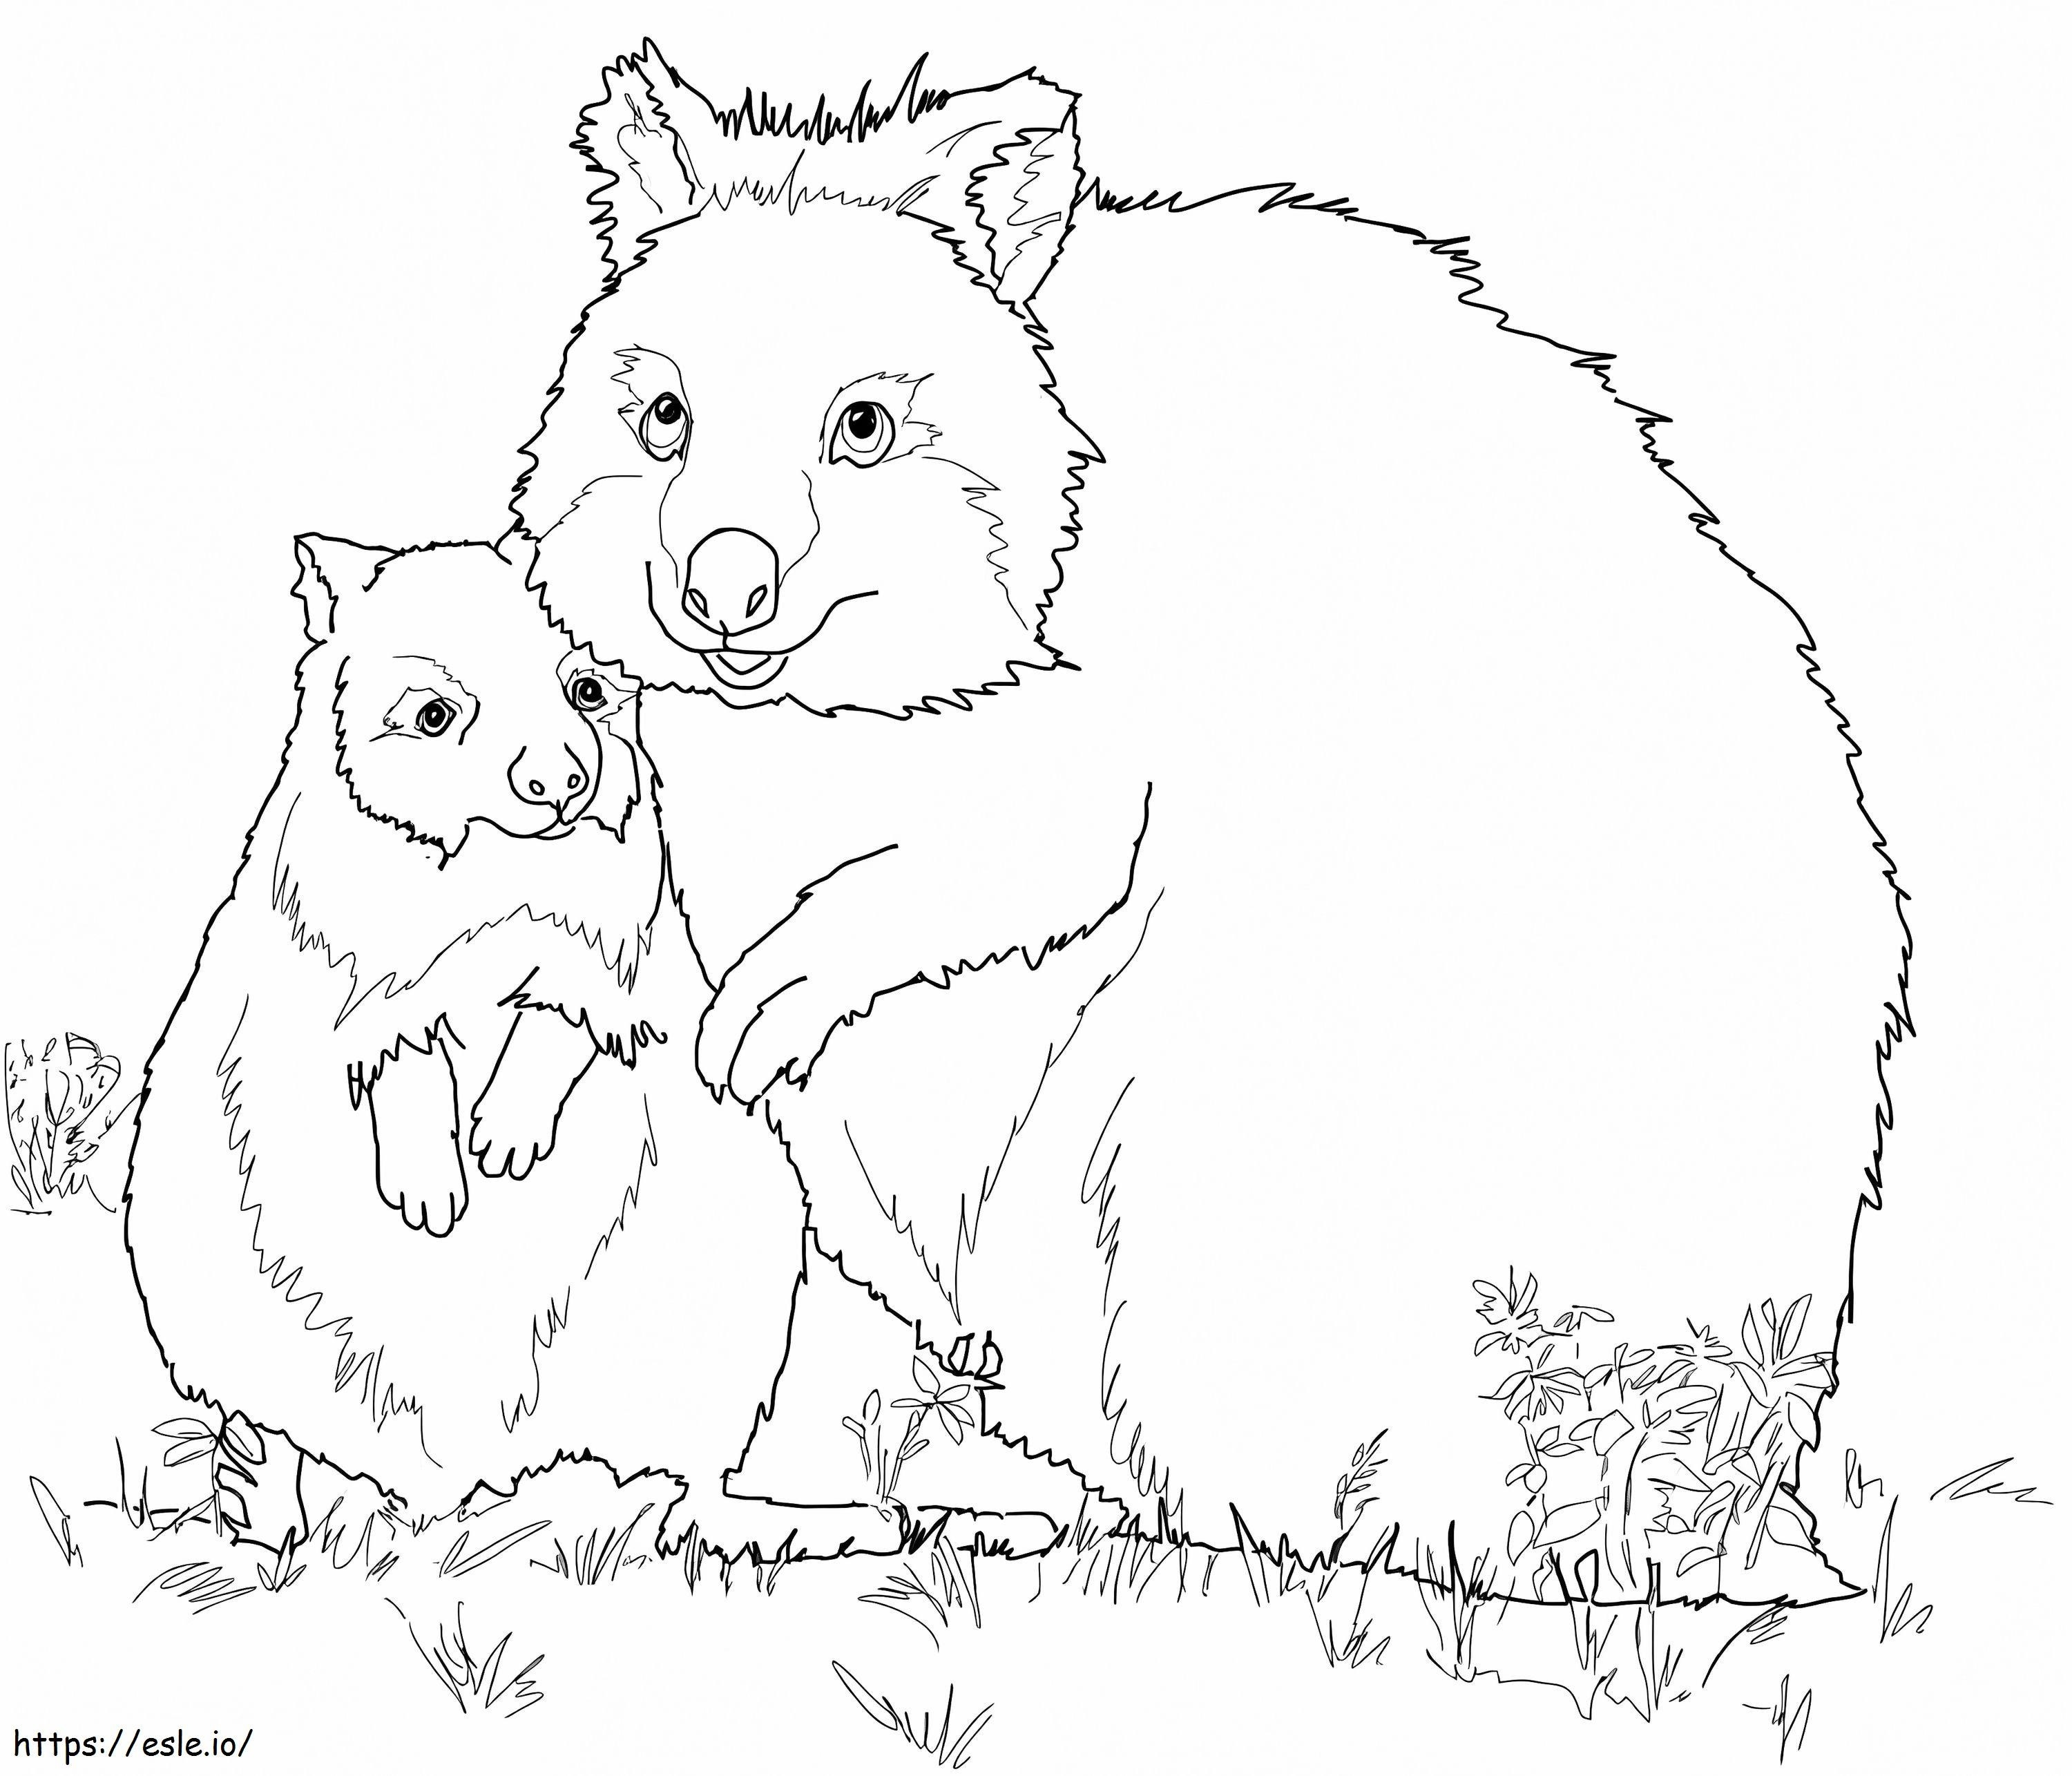 Mother And Baby Quokka coloring page